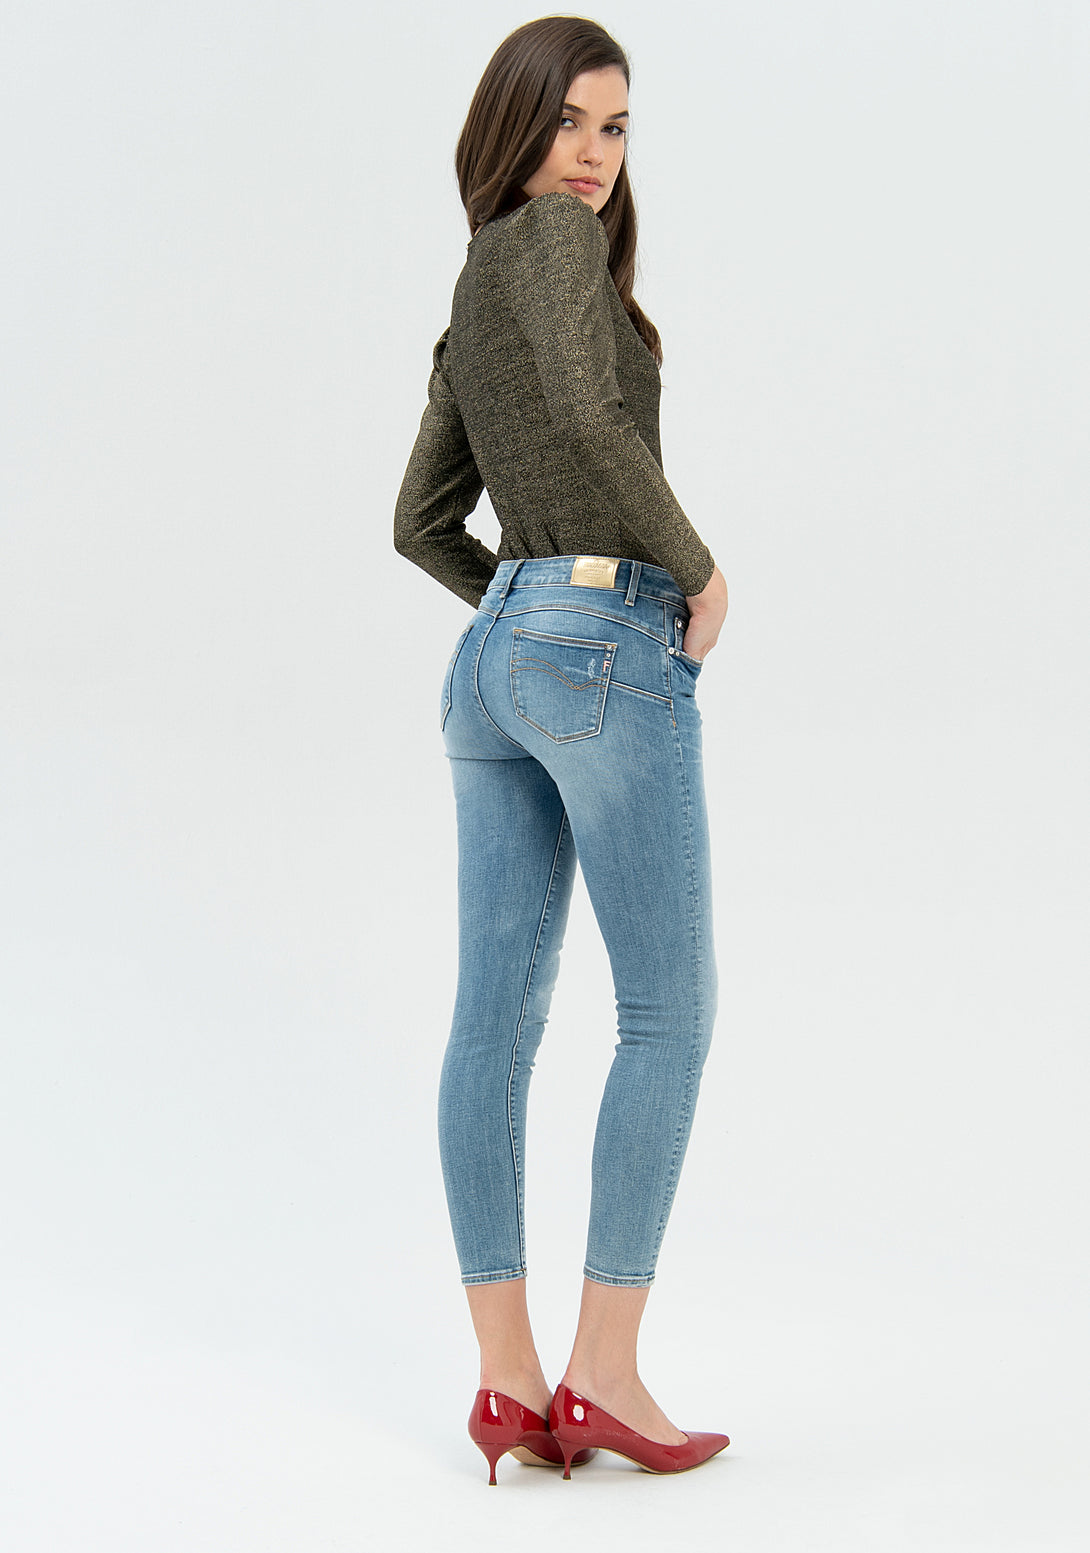 Jeans skinny effetto shape up in denim con lavaggio bleached-FRACOMINA-FP22WV8035D40402-258-JN-24